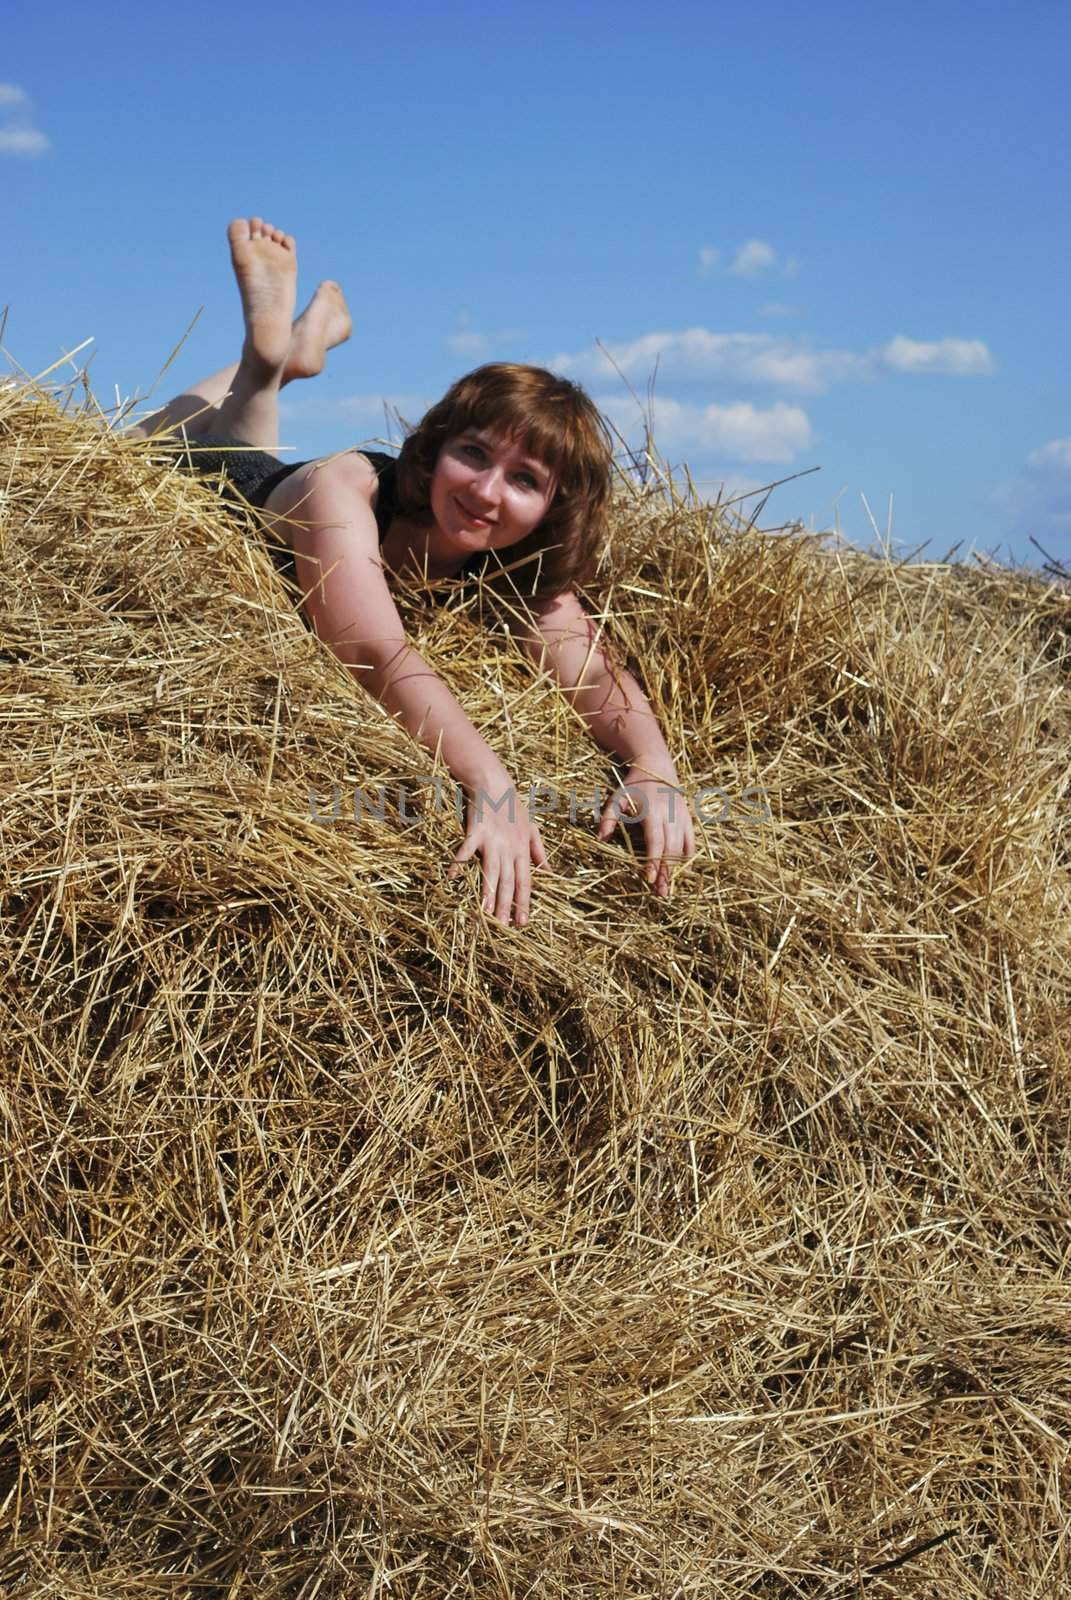 haystack and young woman on distant plan